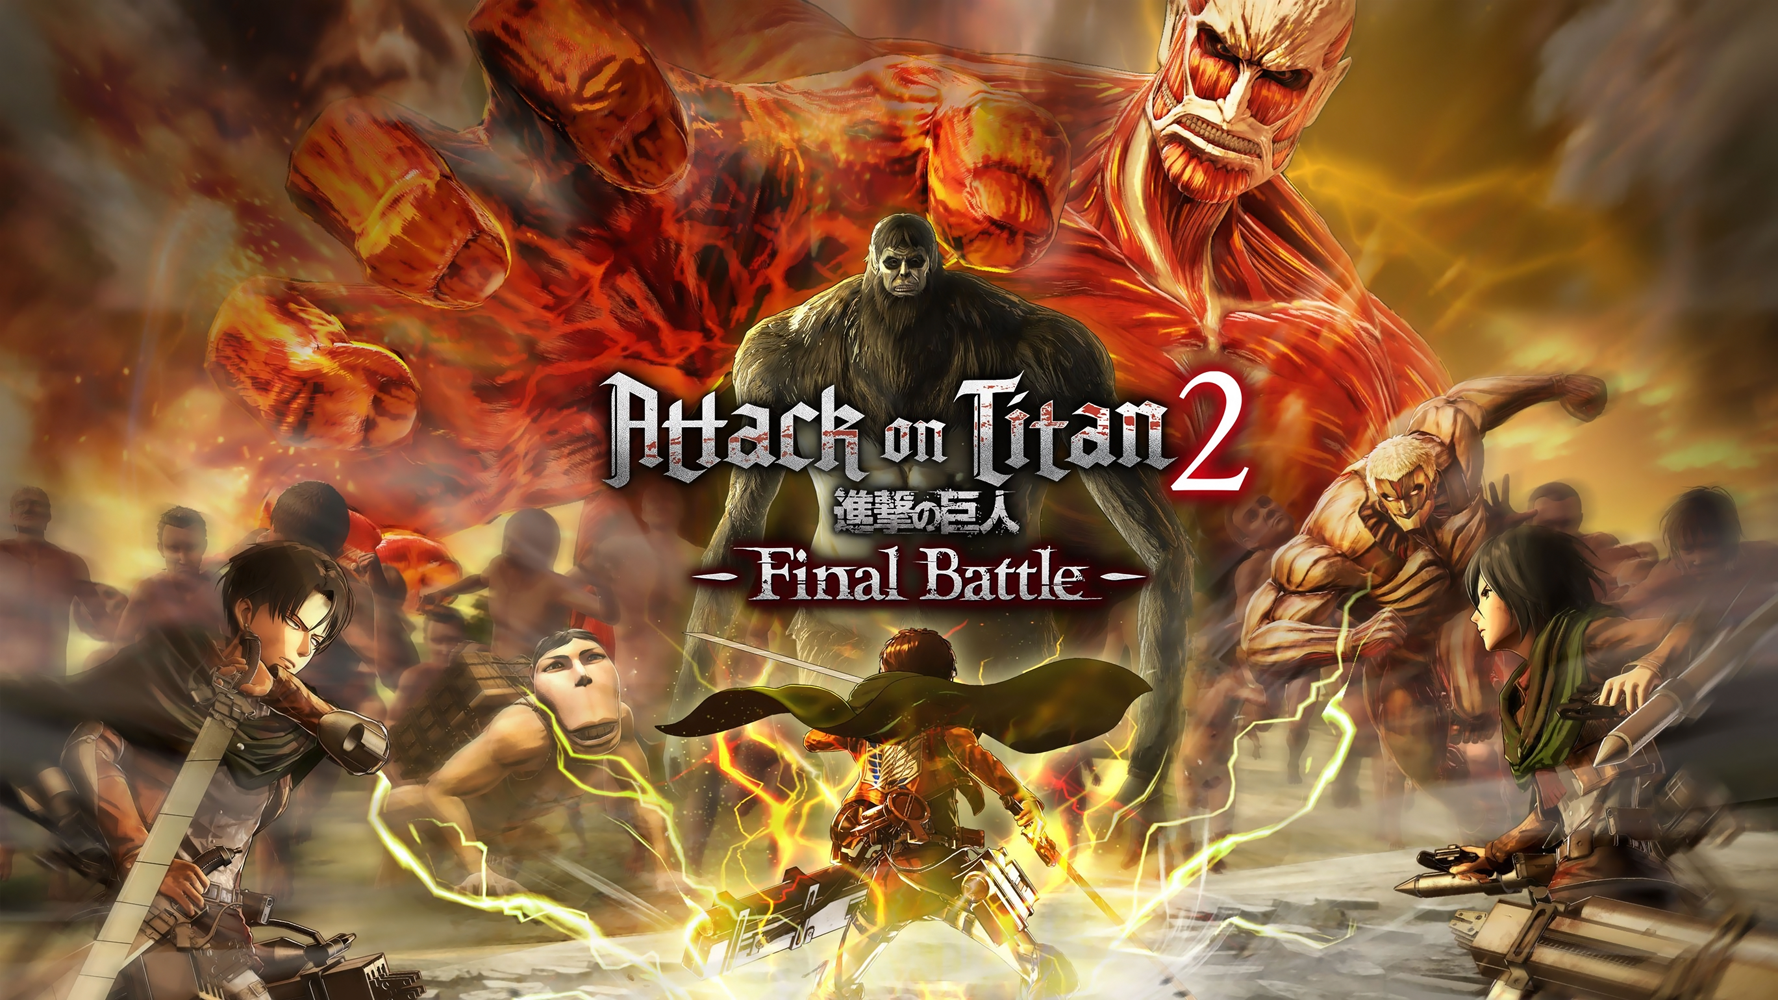 Attack On Titan 2: Final Battle Review – Attack on Titan Transformed